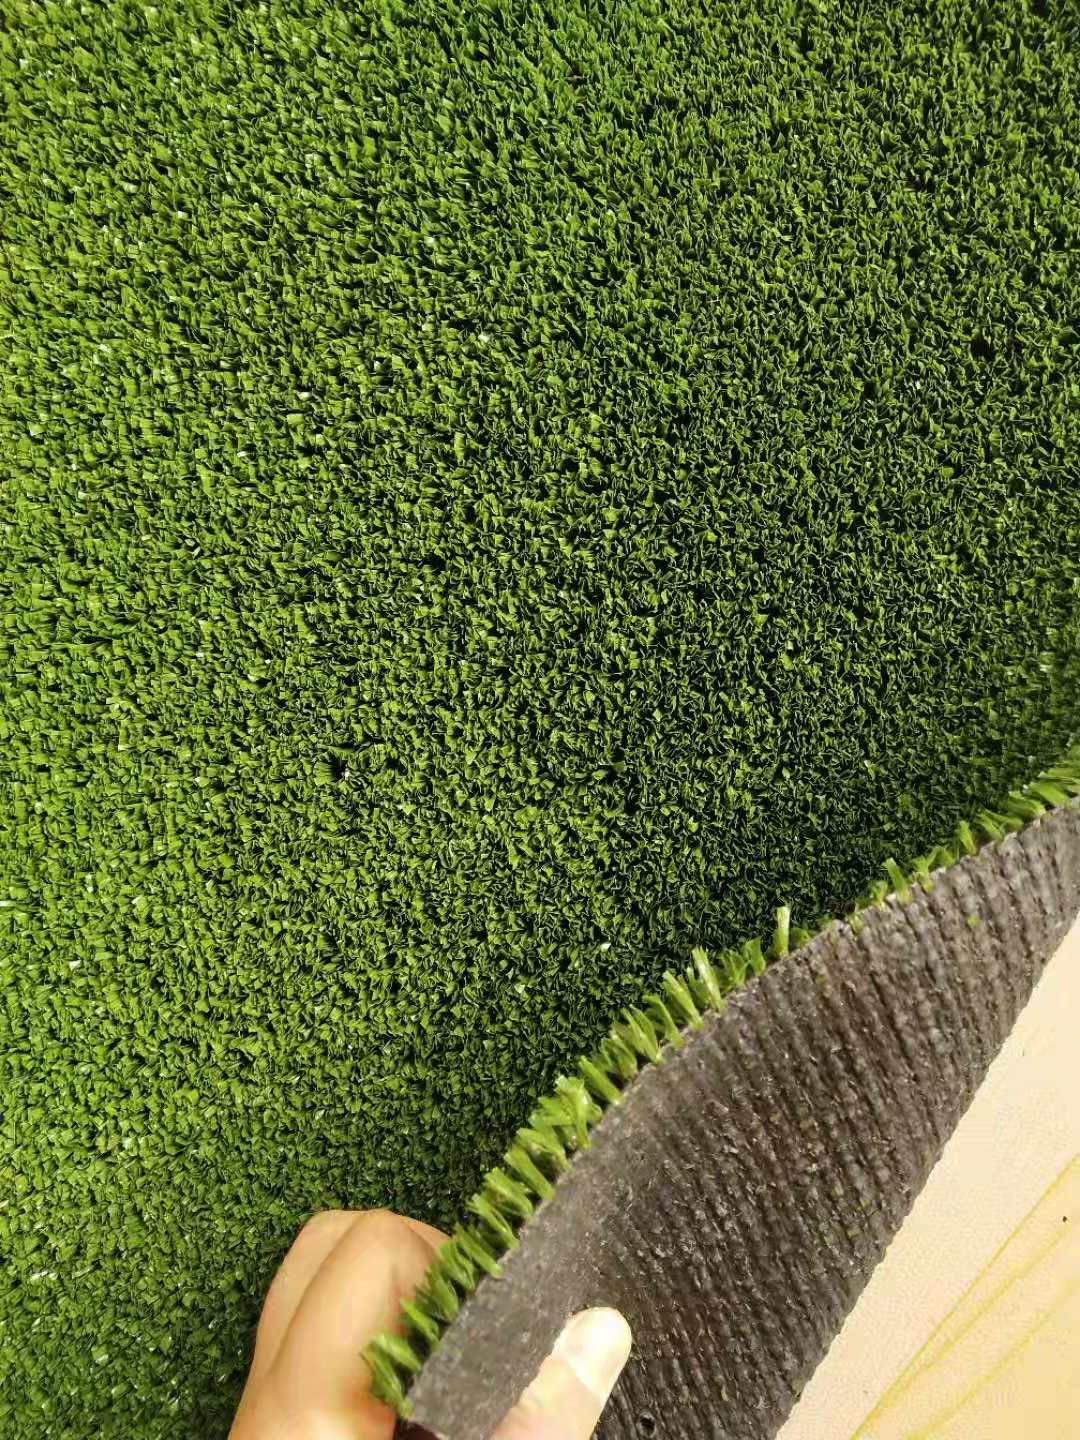 Lawn Artificial Turf: How to Use Artificial Turf